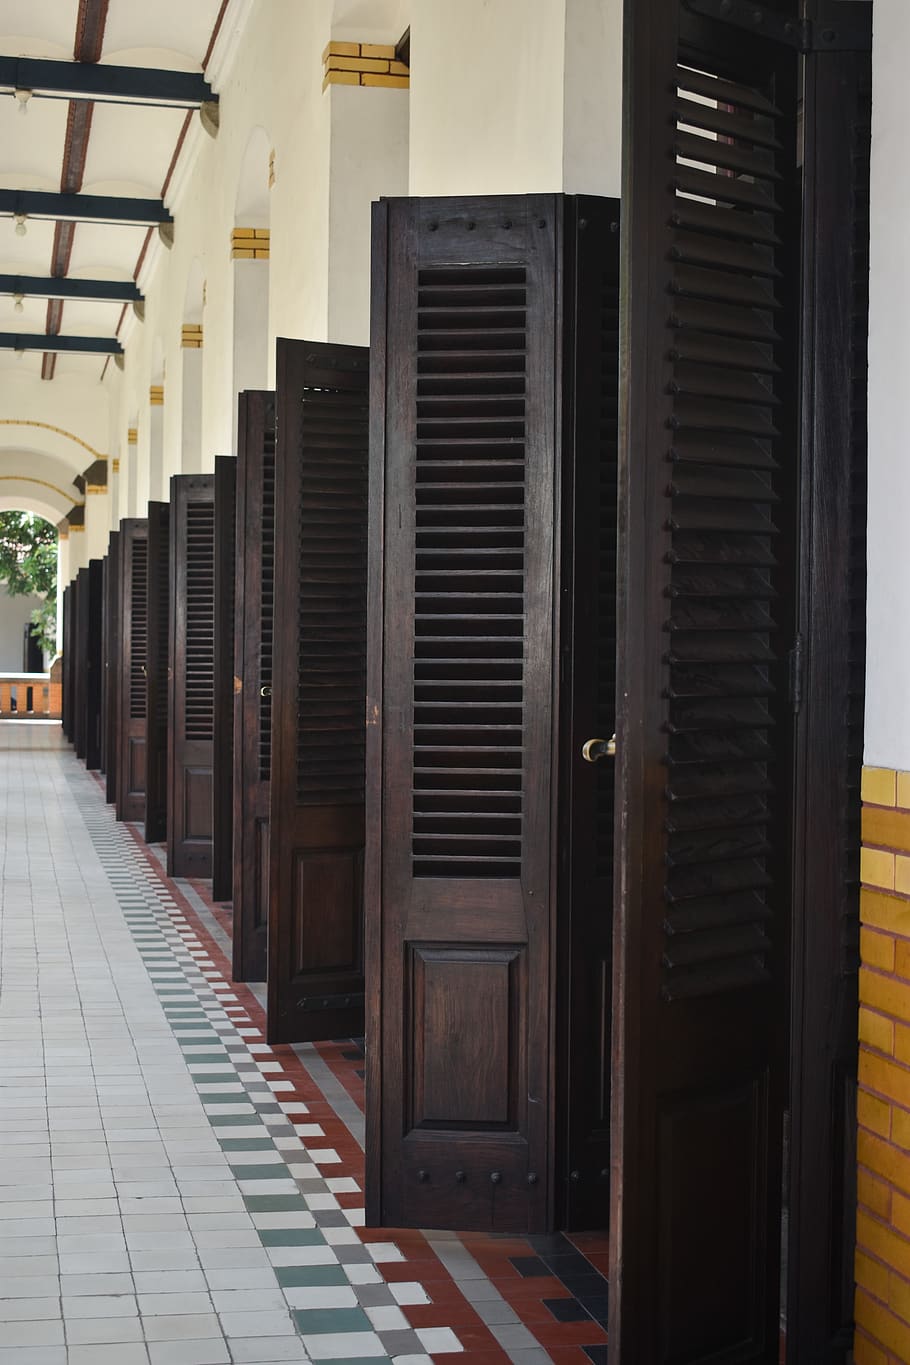 doors, architecture, old, ancient, building, built structure, arcade, in a row, corridor, direction